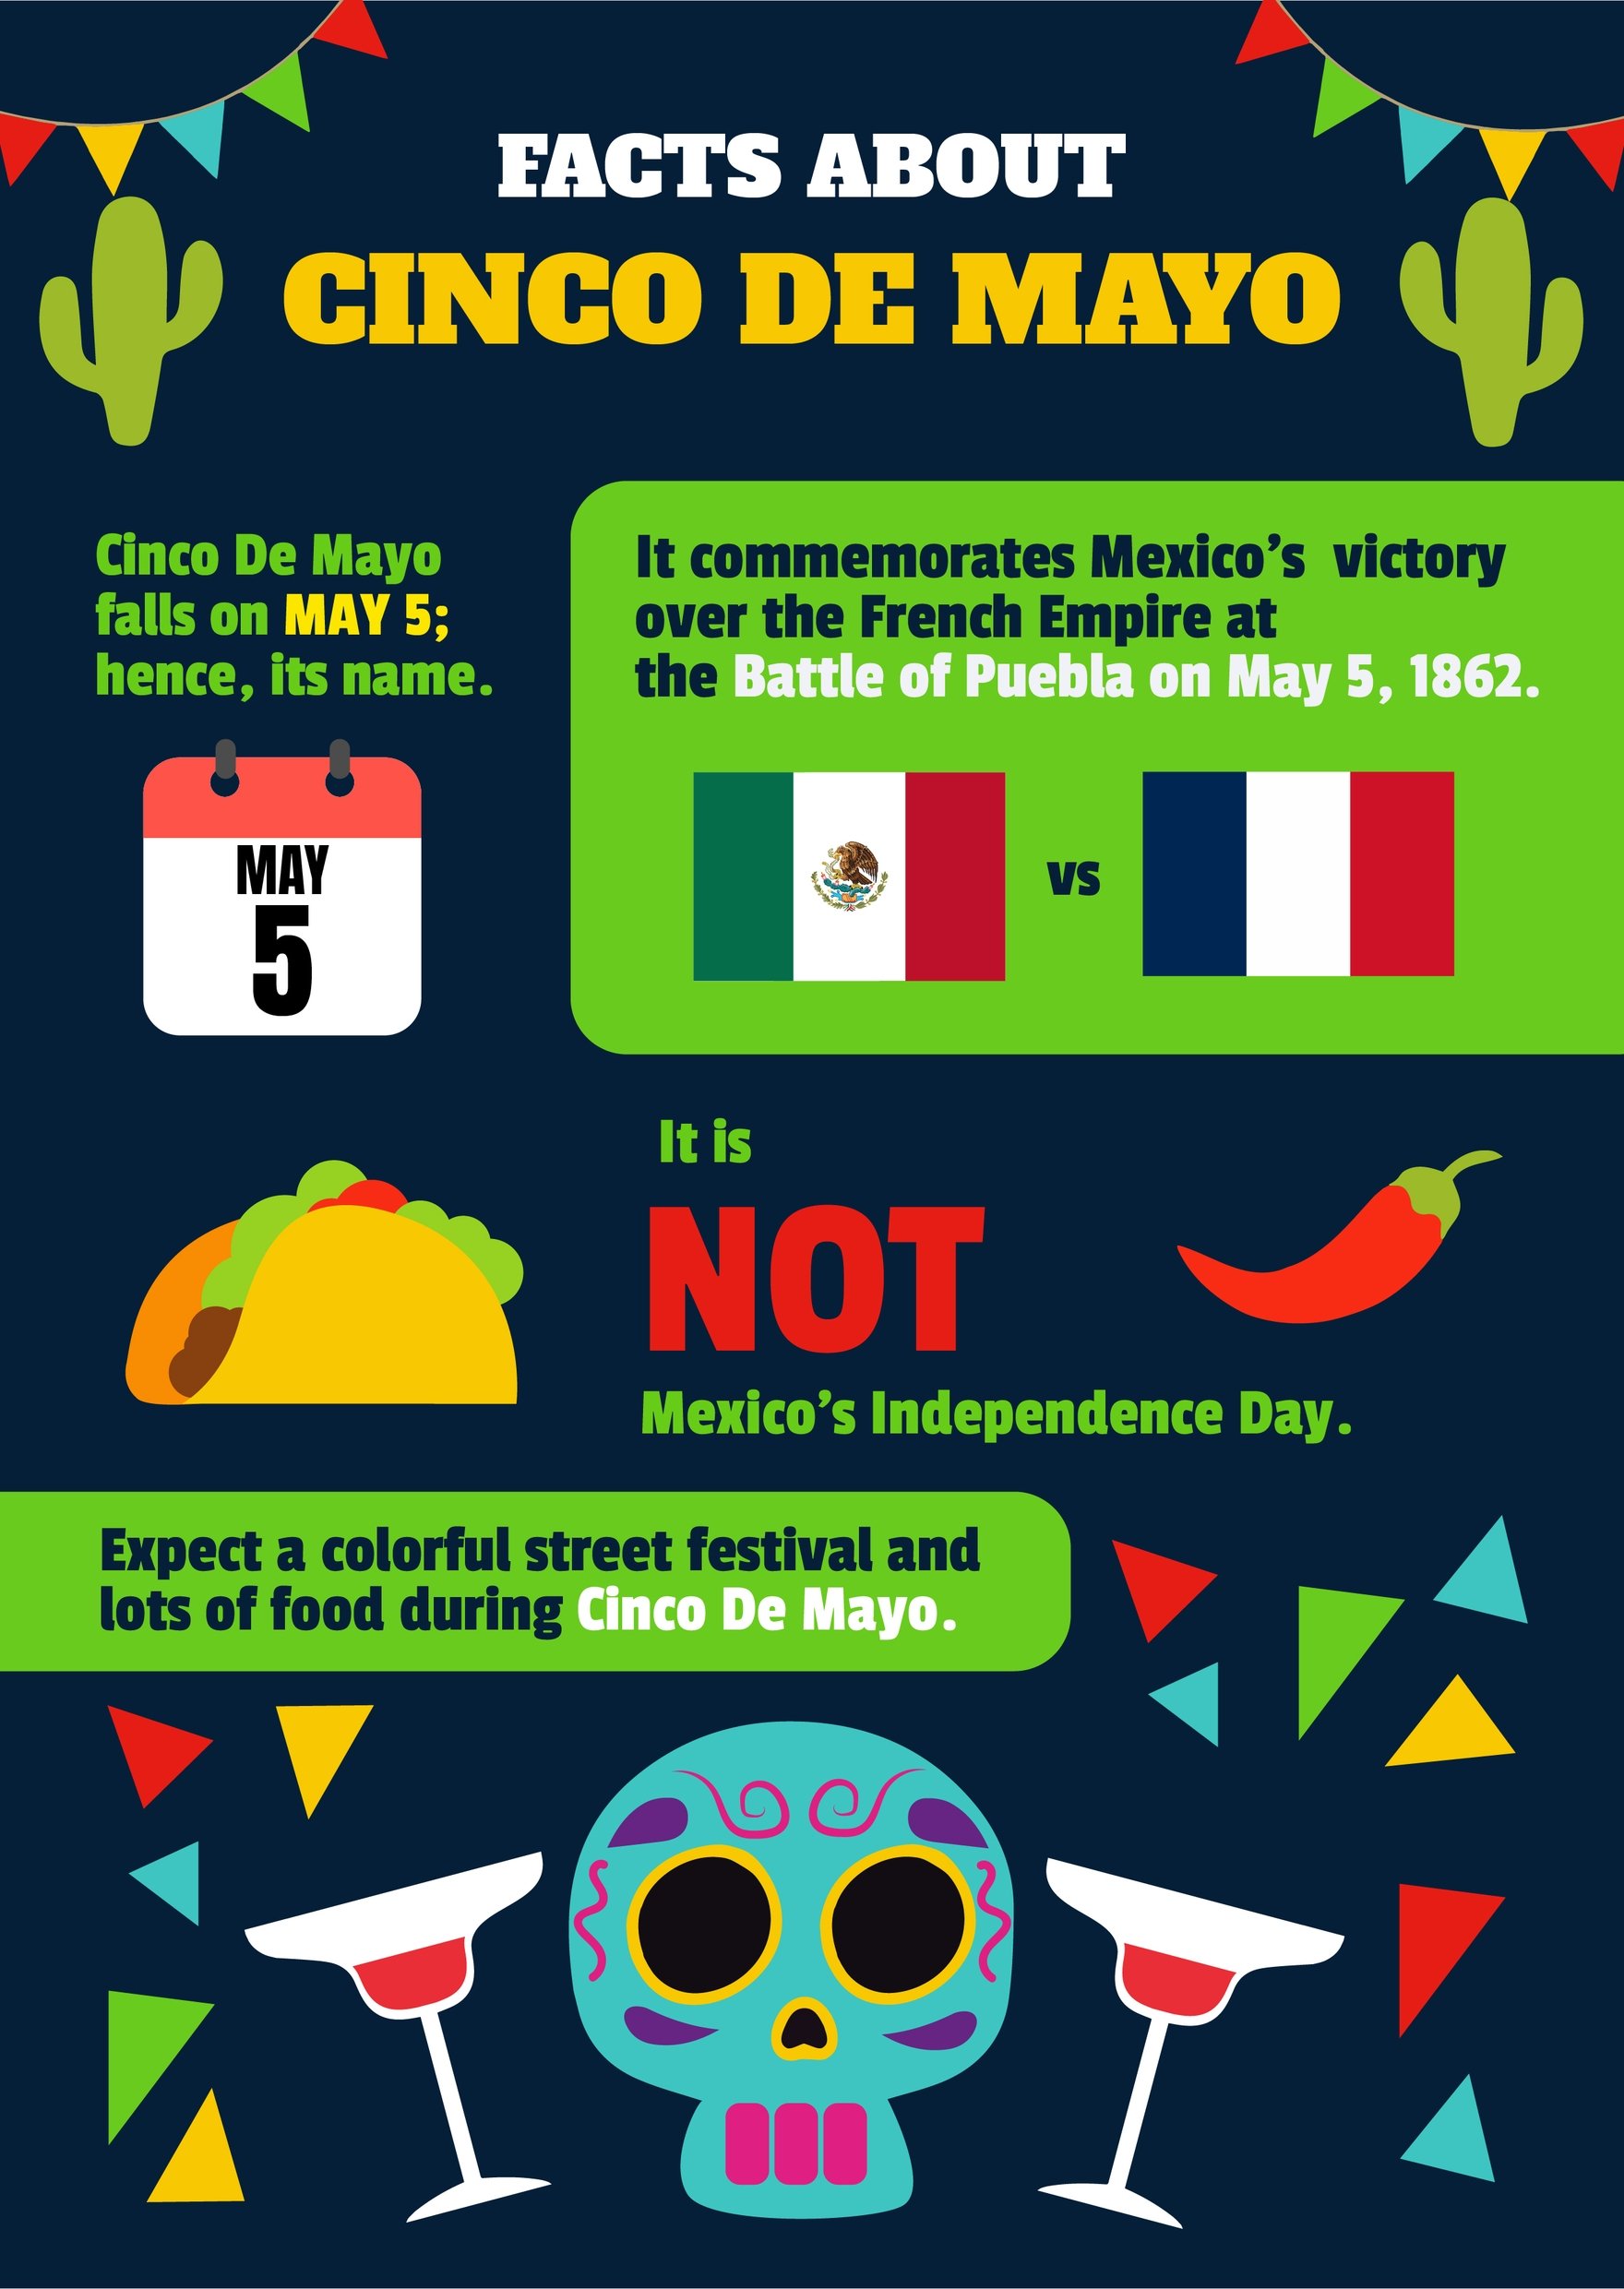 Free Facts About Cinco De Mayo in Illustrator